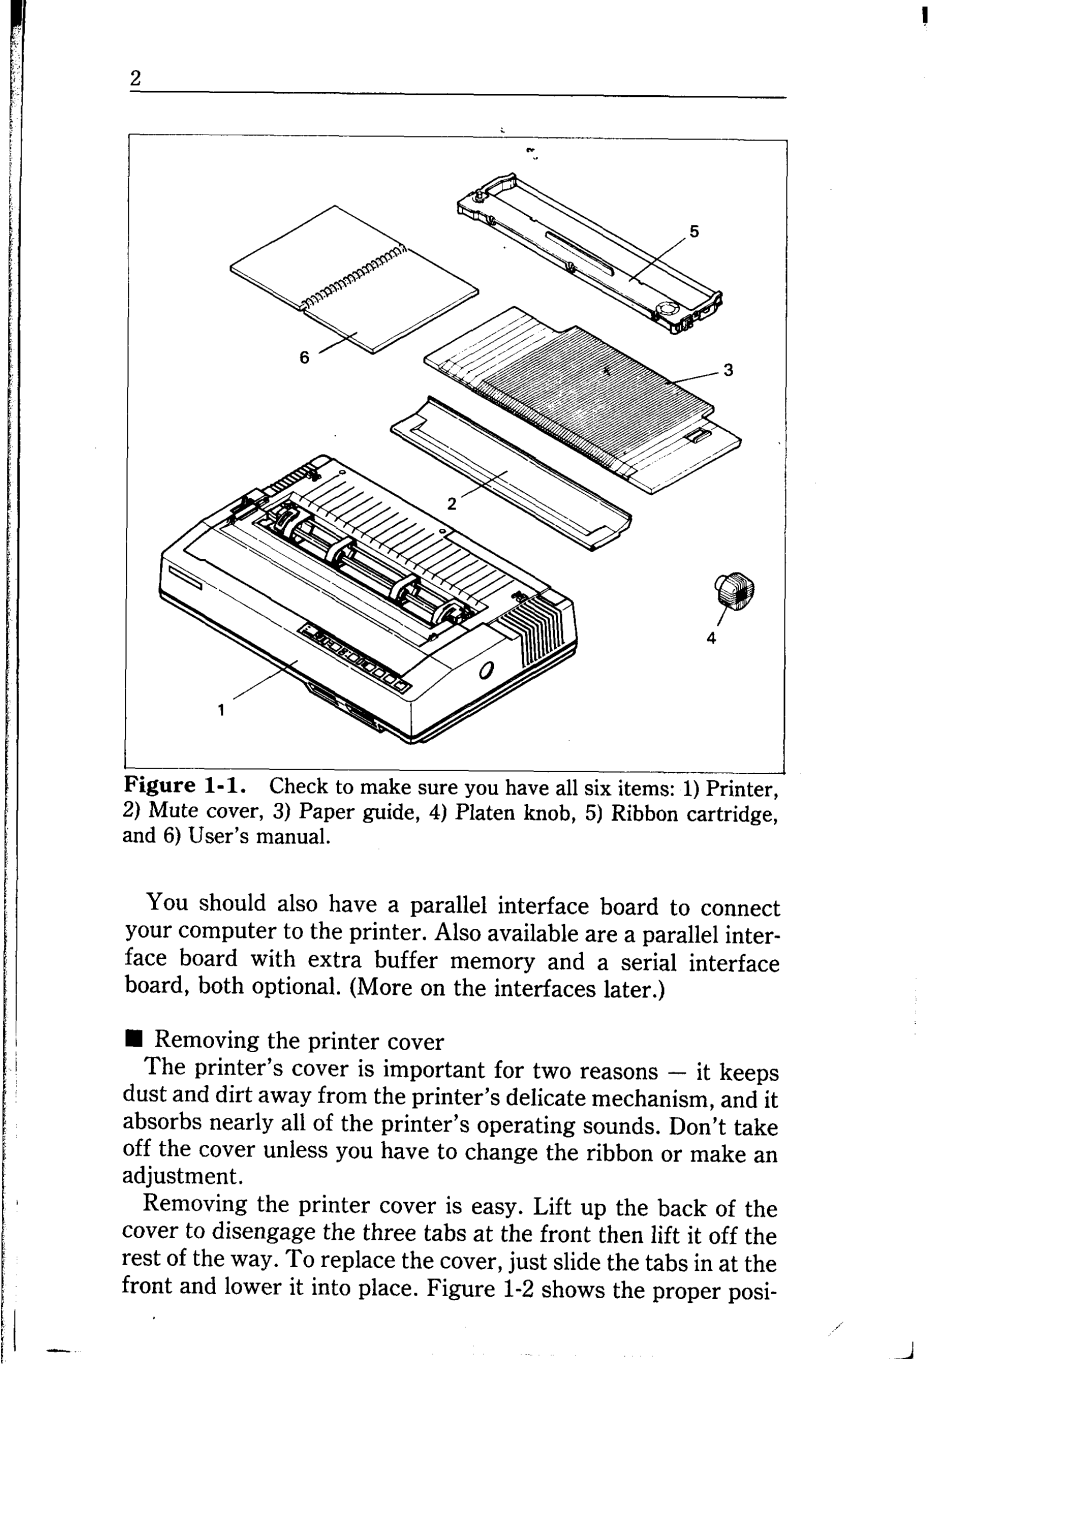 Star Micronics NB-15 user manual Removing the printer cover 